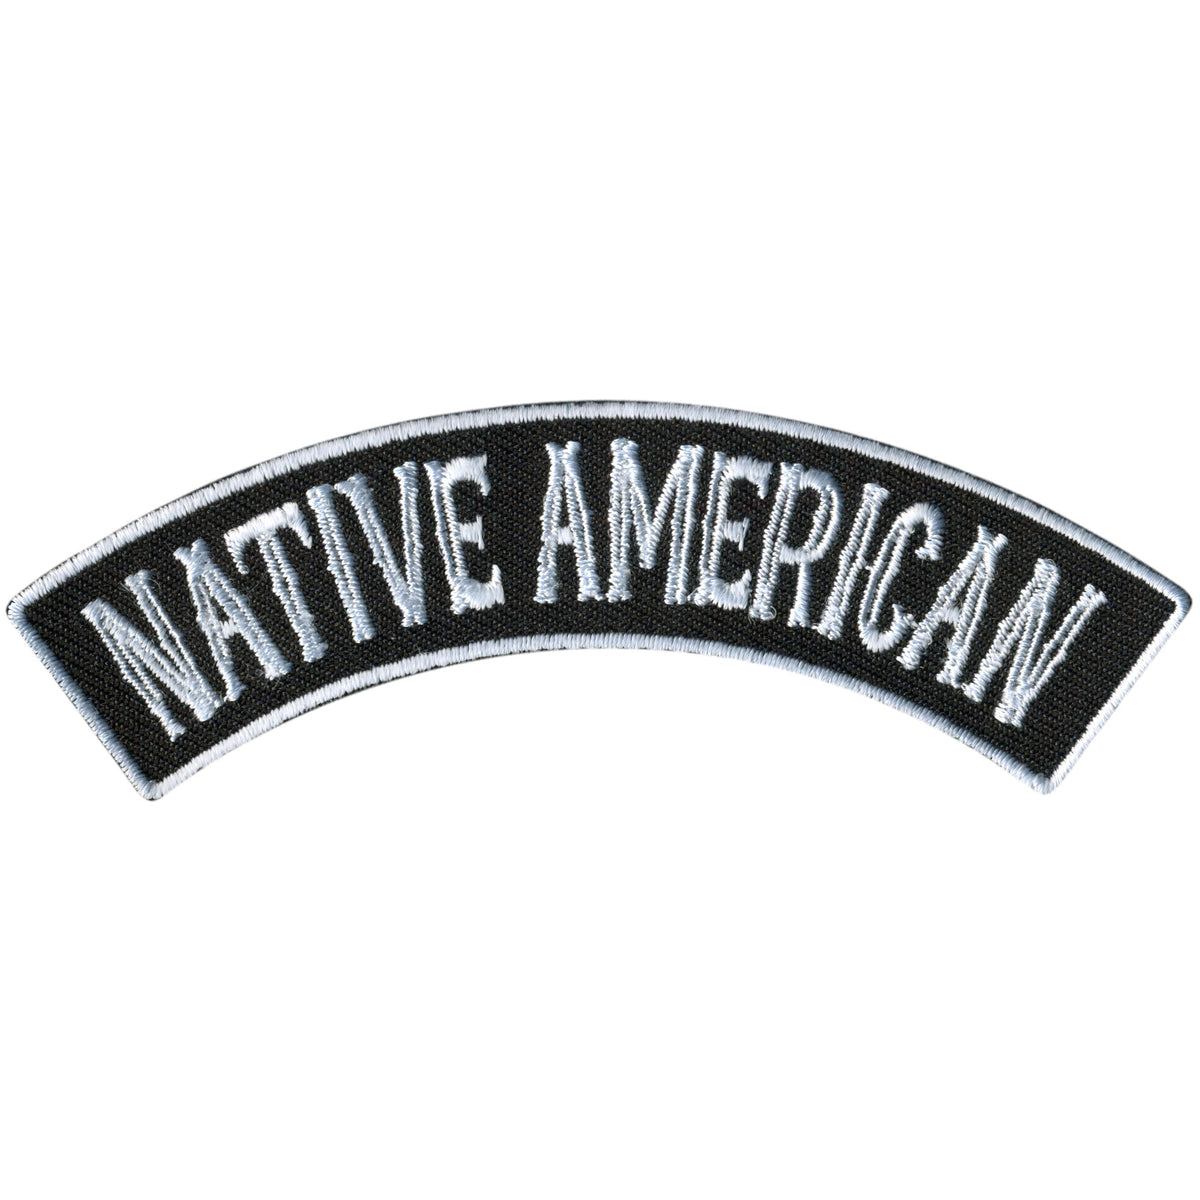 Hot Leathers Native American 4” X 1” Top Rocker Patch